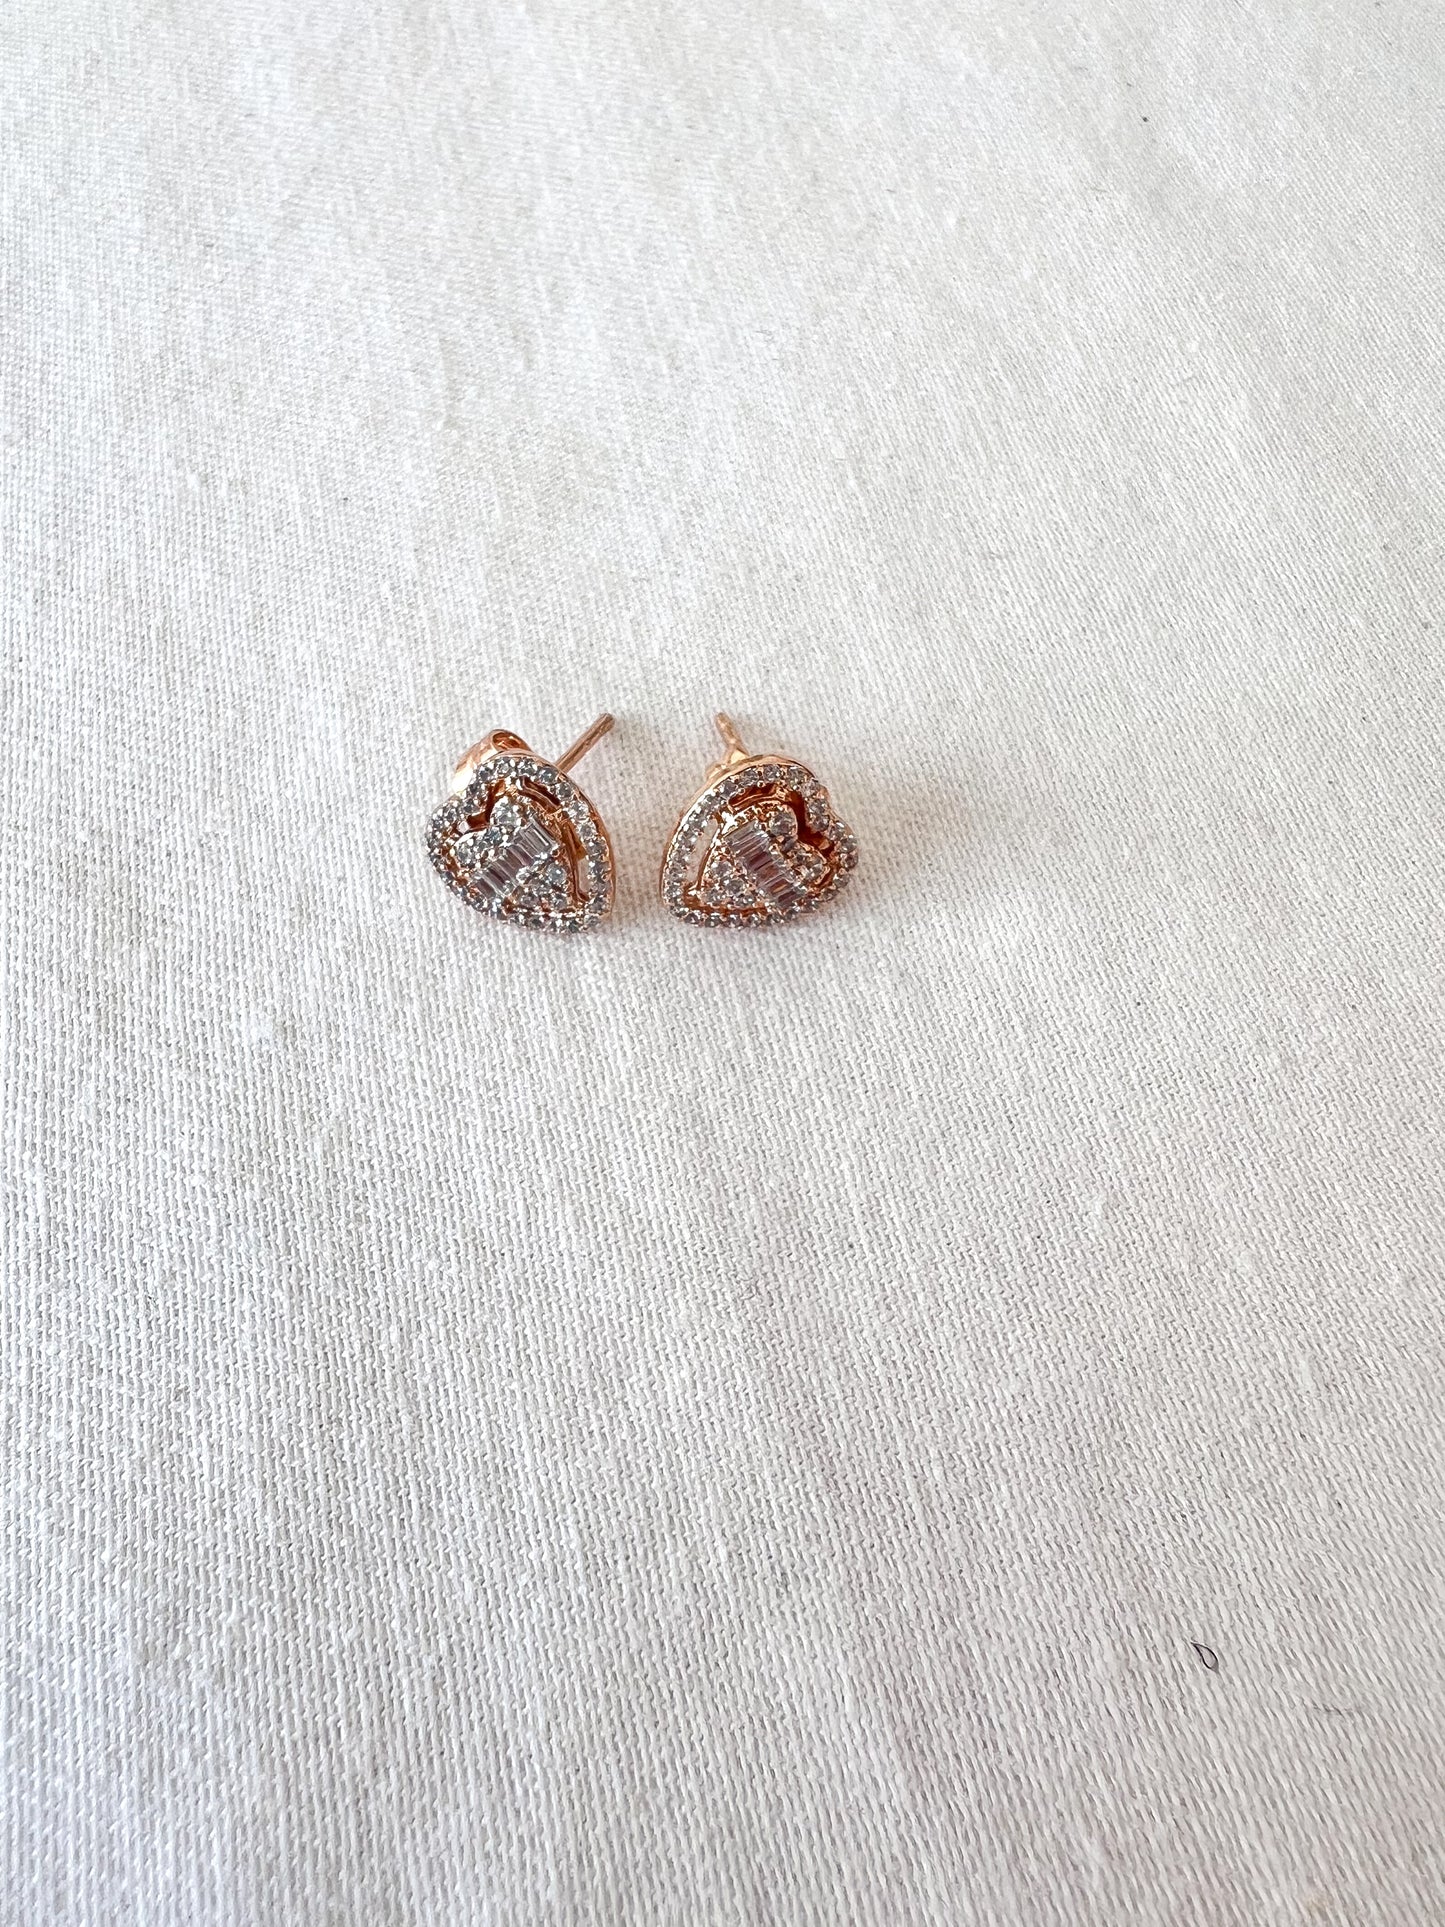 Baguette and Heart Studs